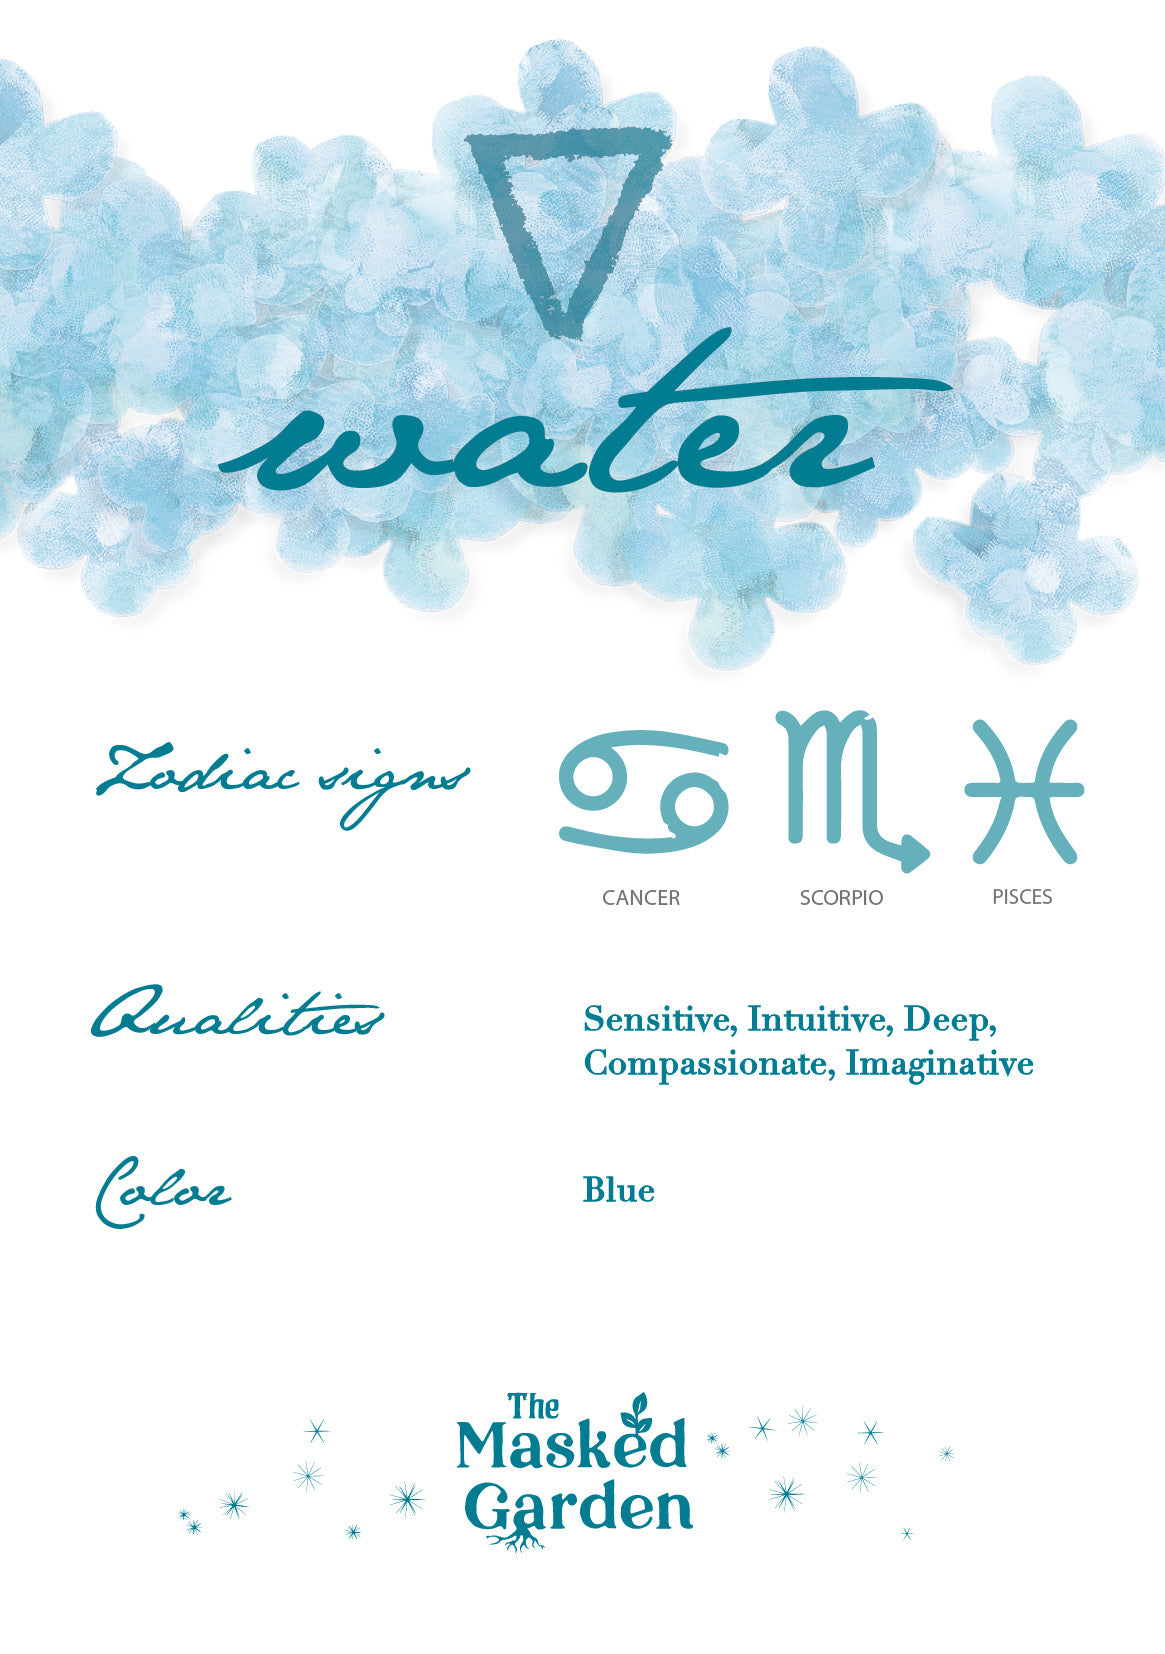 Water | 5 Elements Soy Wax Candle